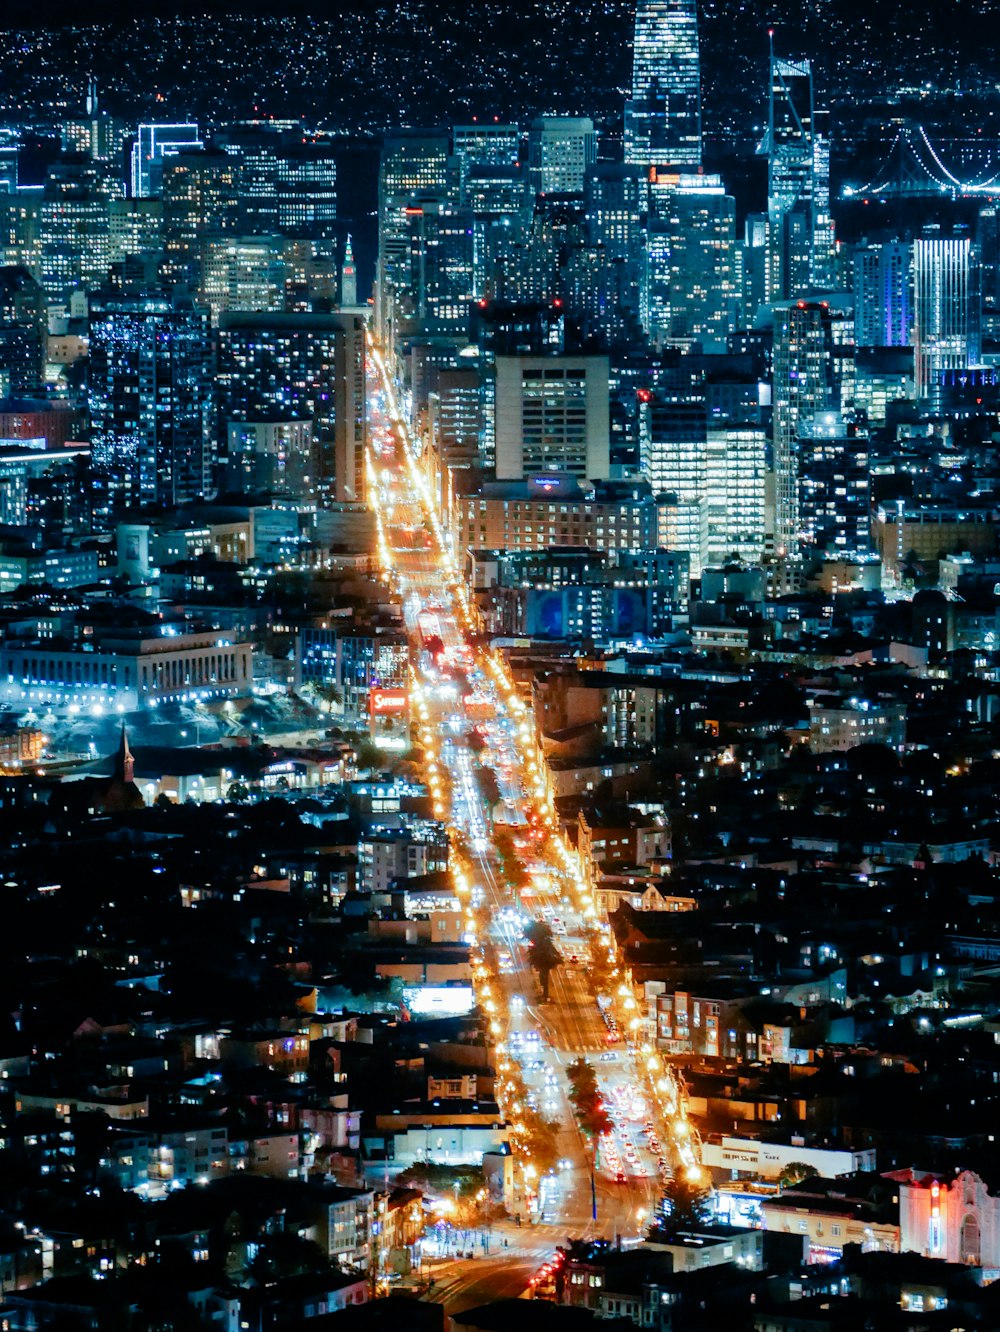 a city at night with lots of traffic